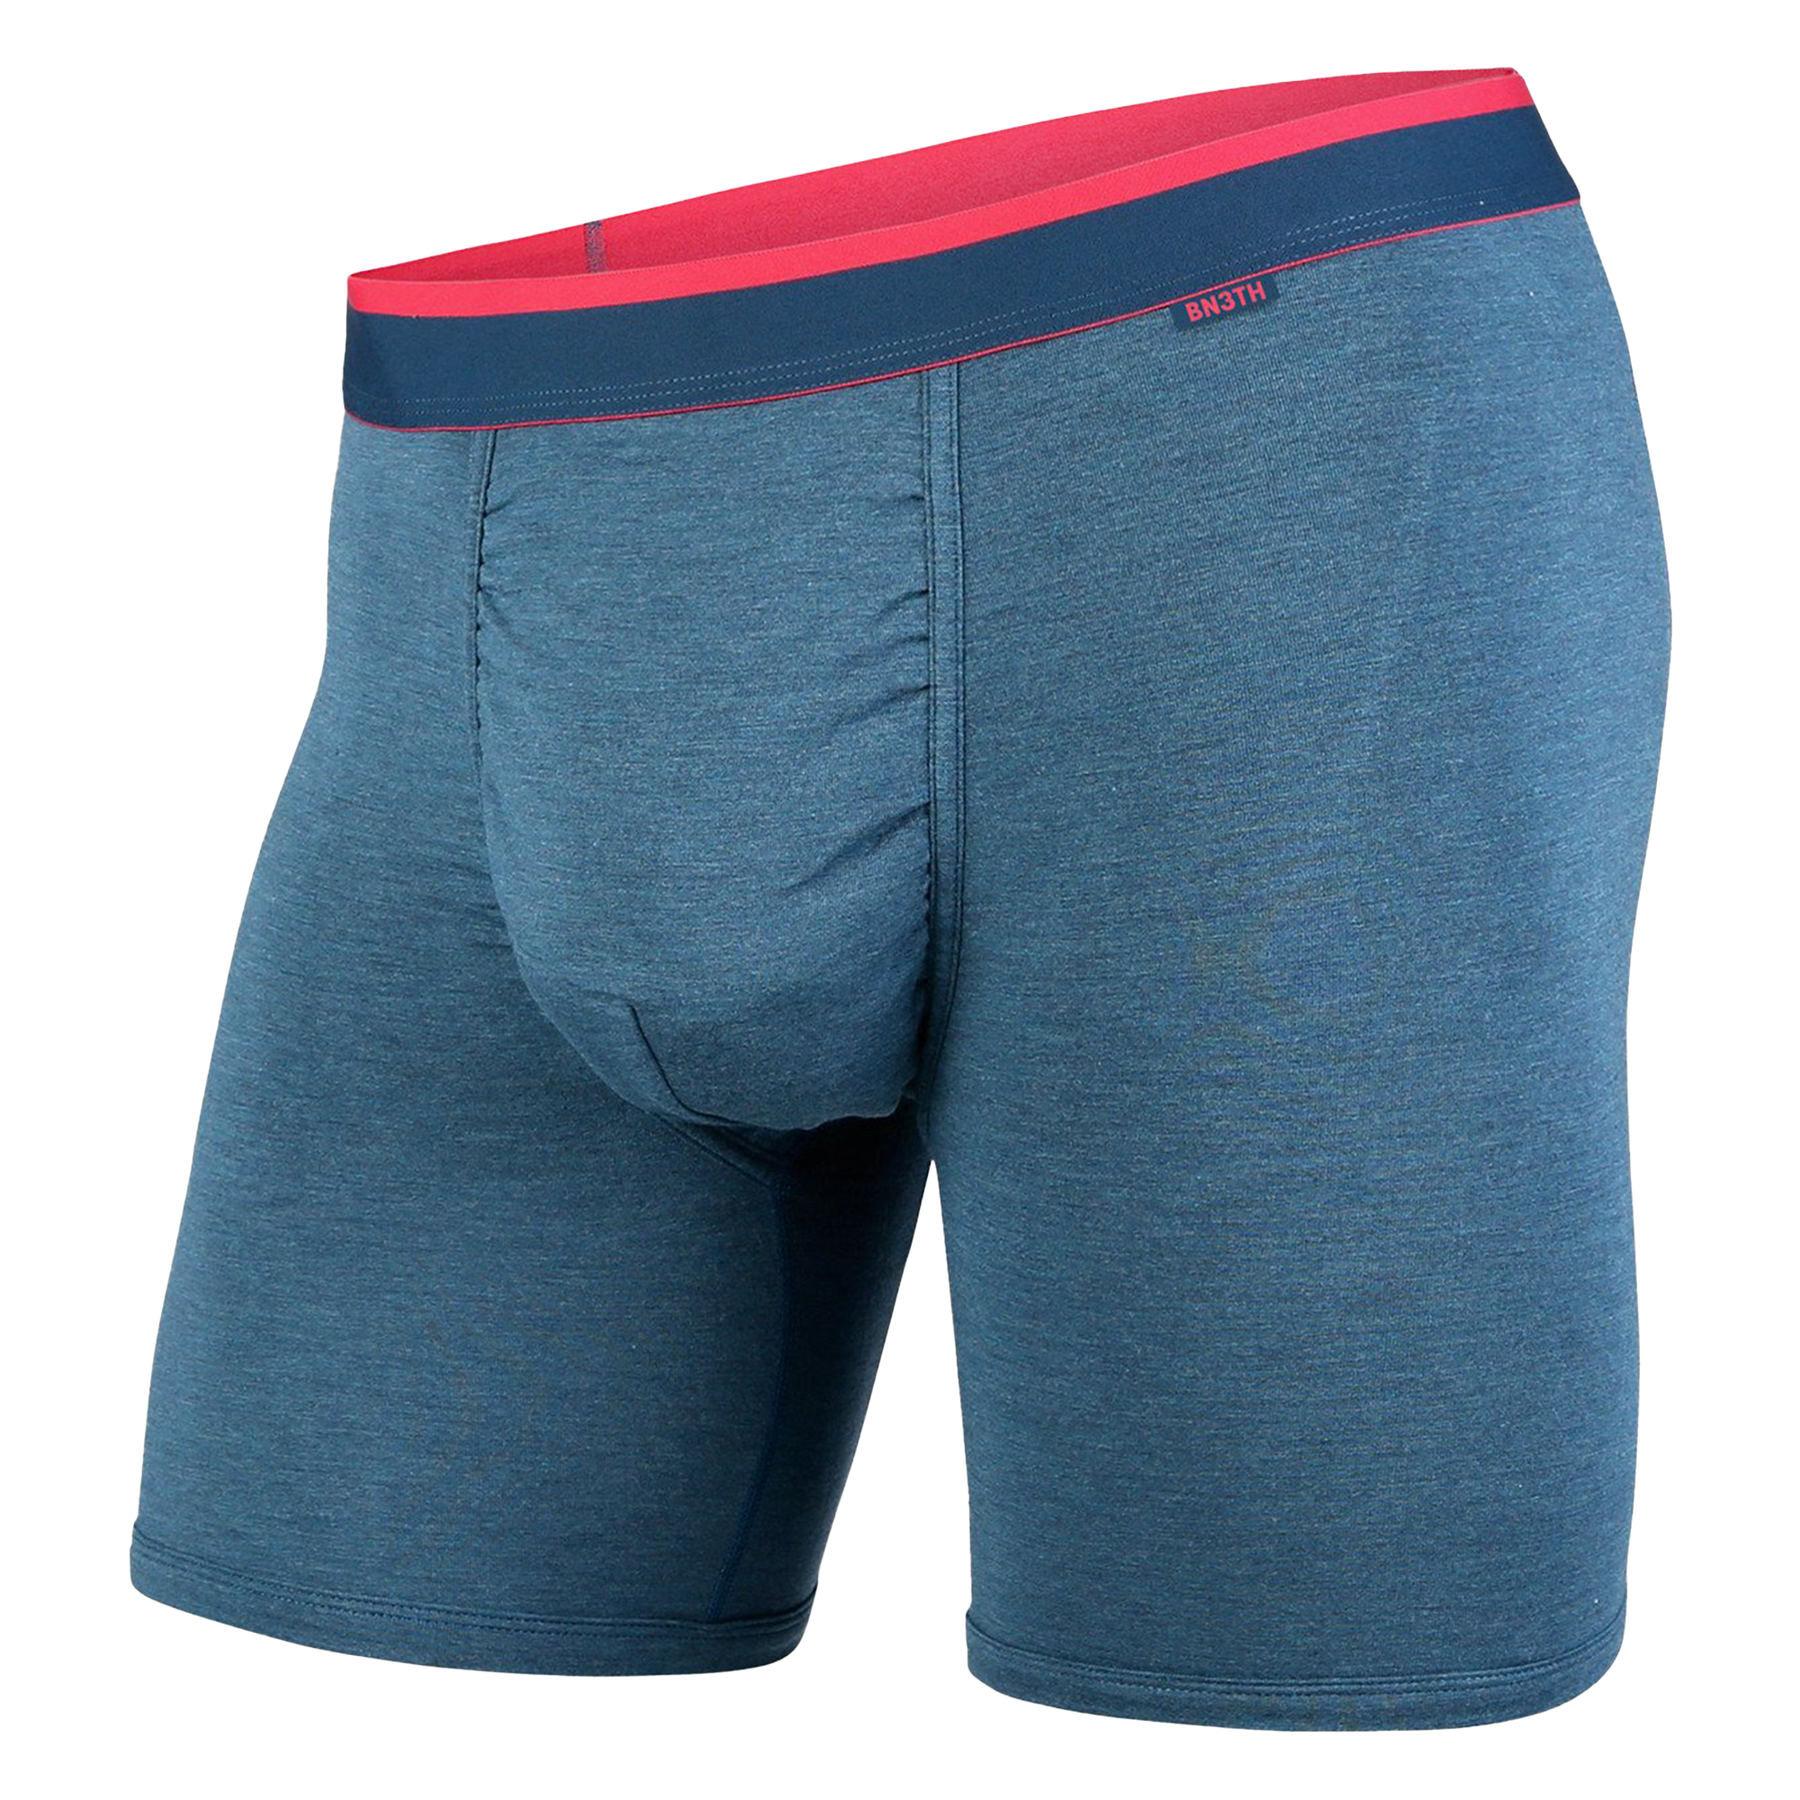 BN3TH CLASSIC BOXER BRIEF - INK & PINK – CABIN